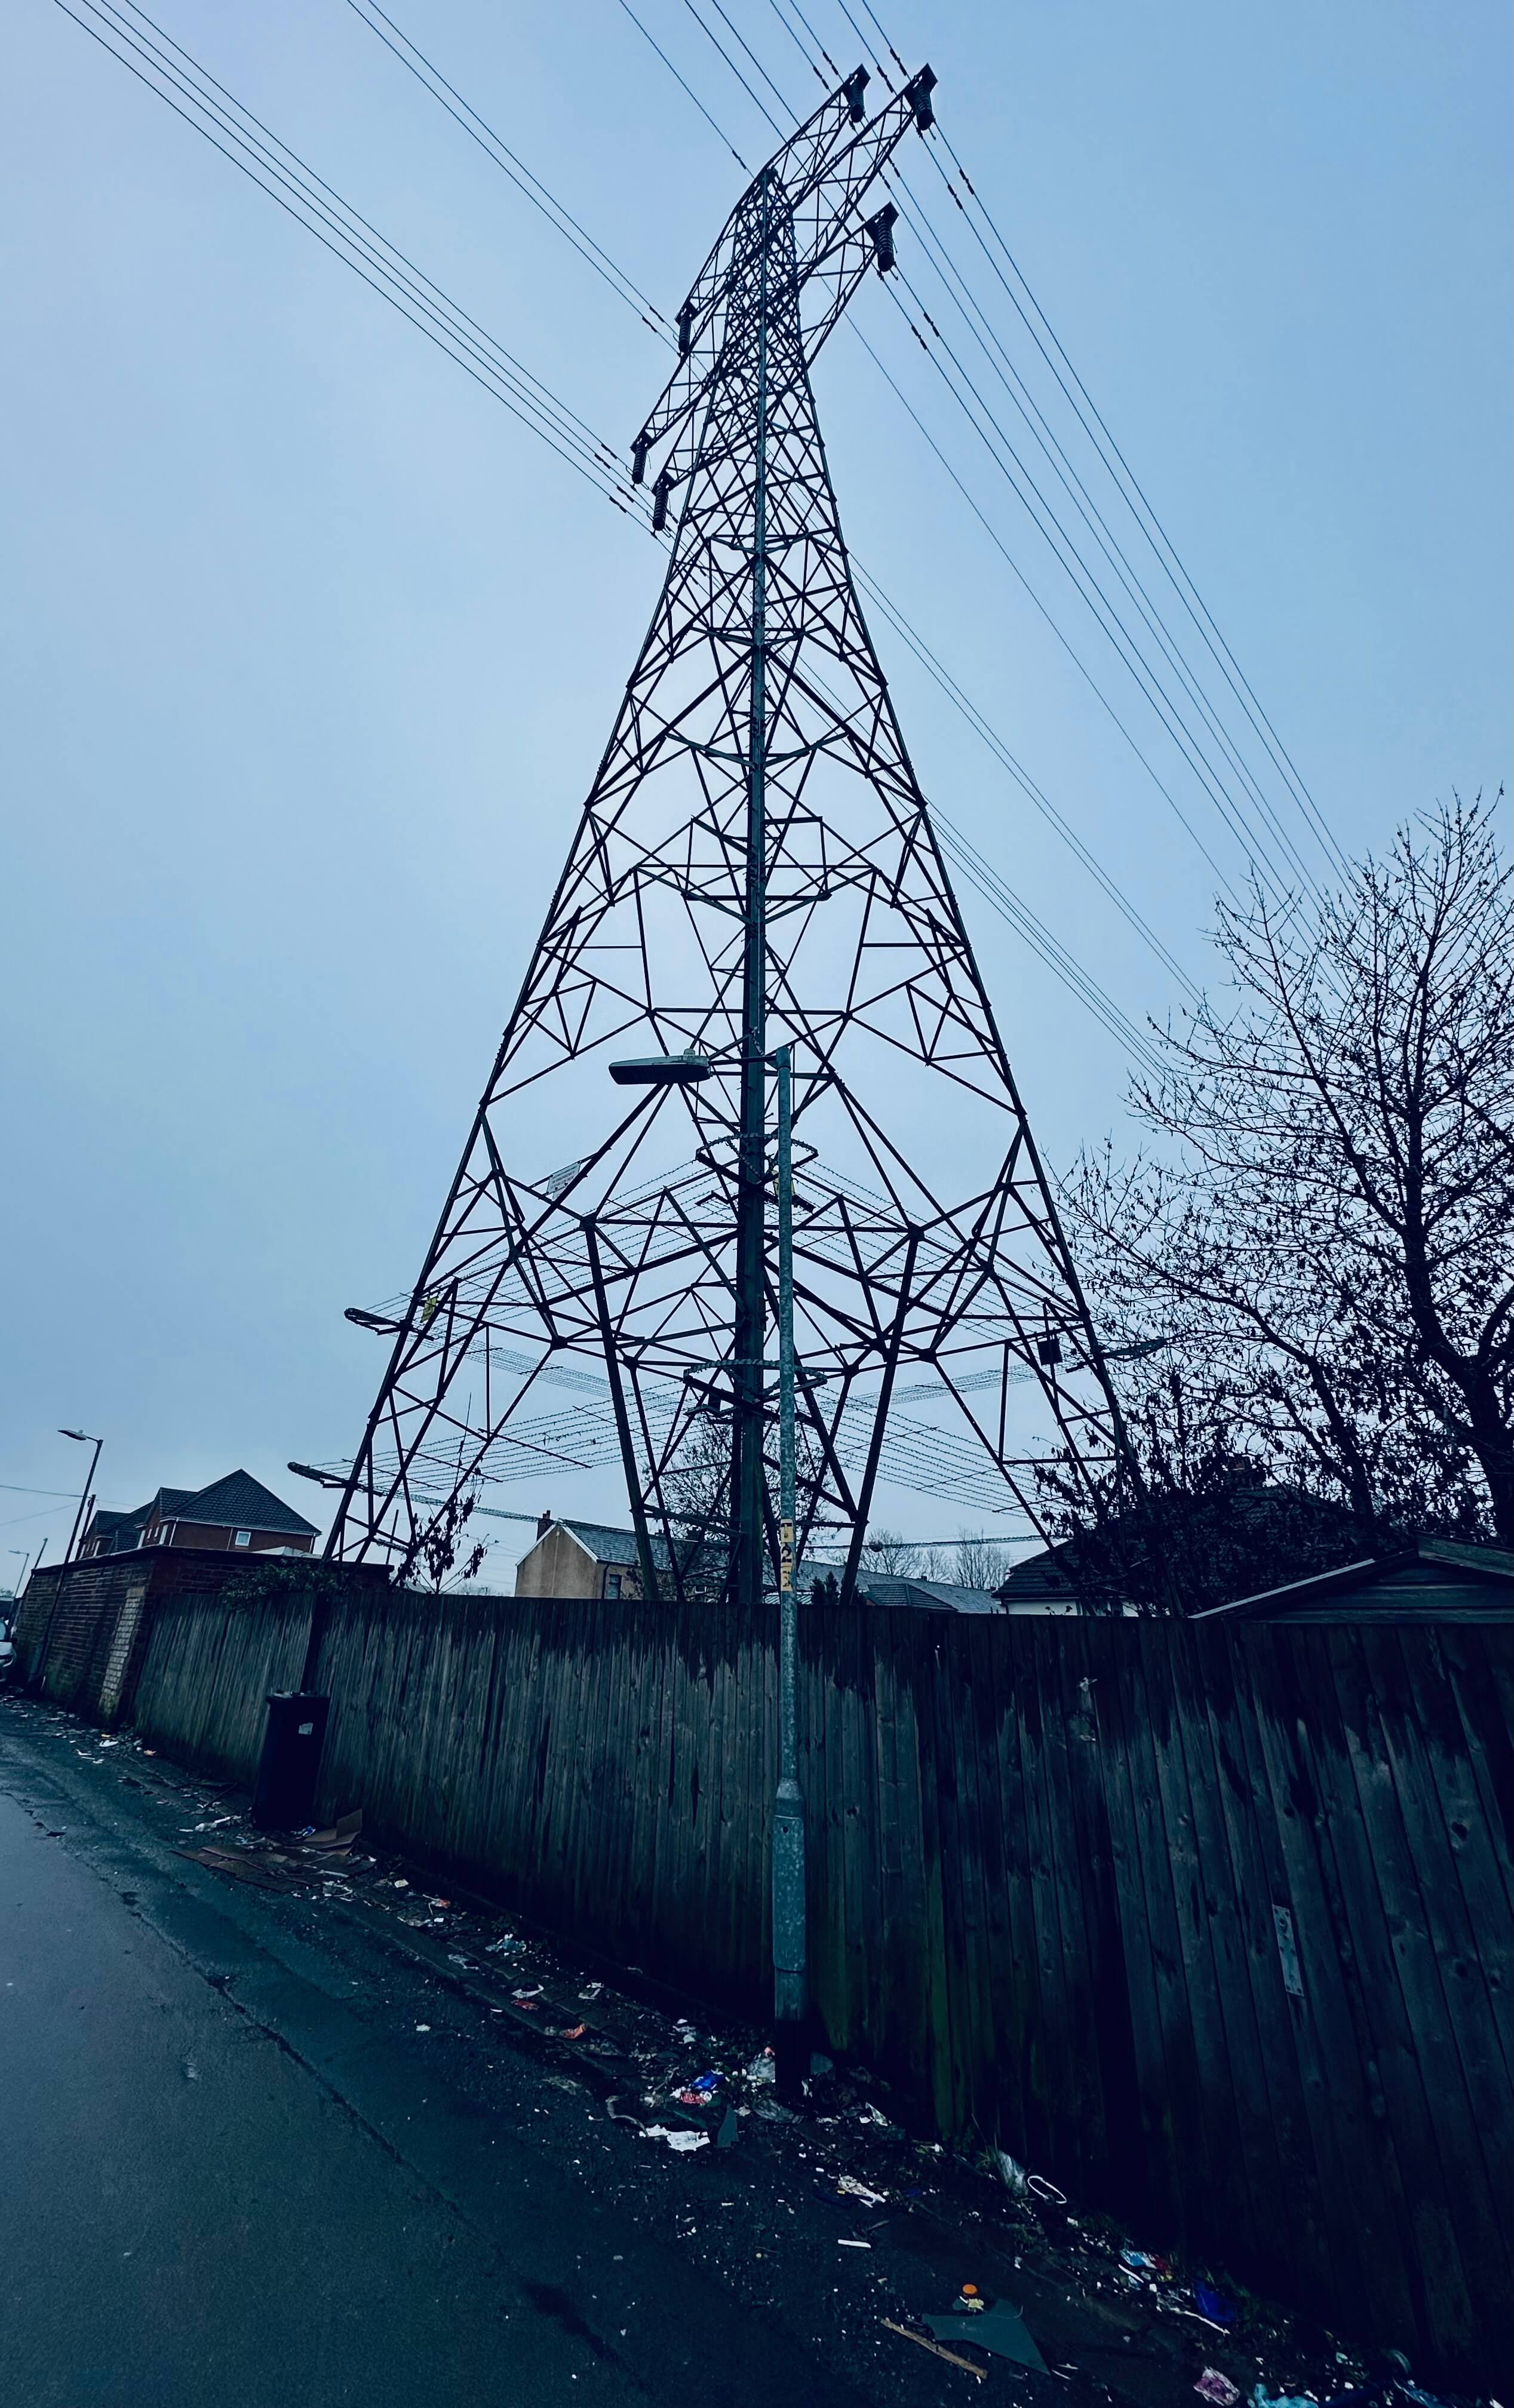 A very desaturated image of an english back street, an electricity pylon dominates a grey sky.